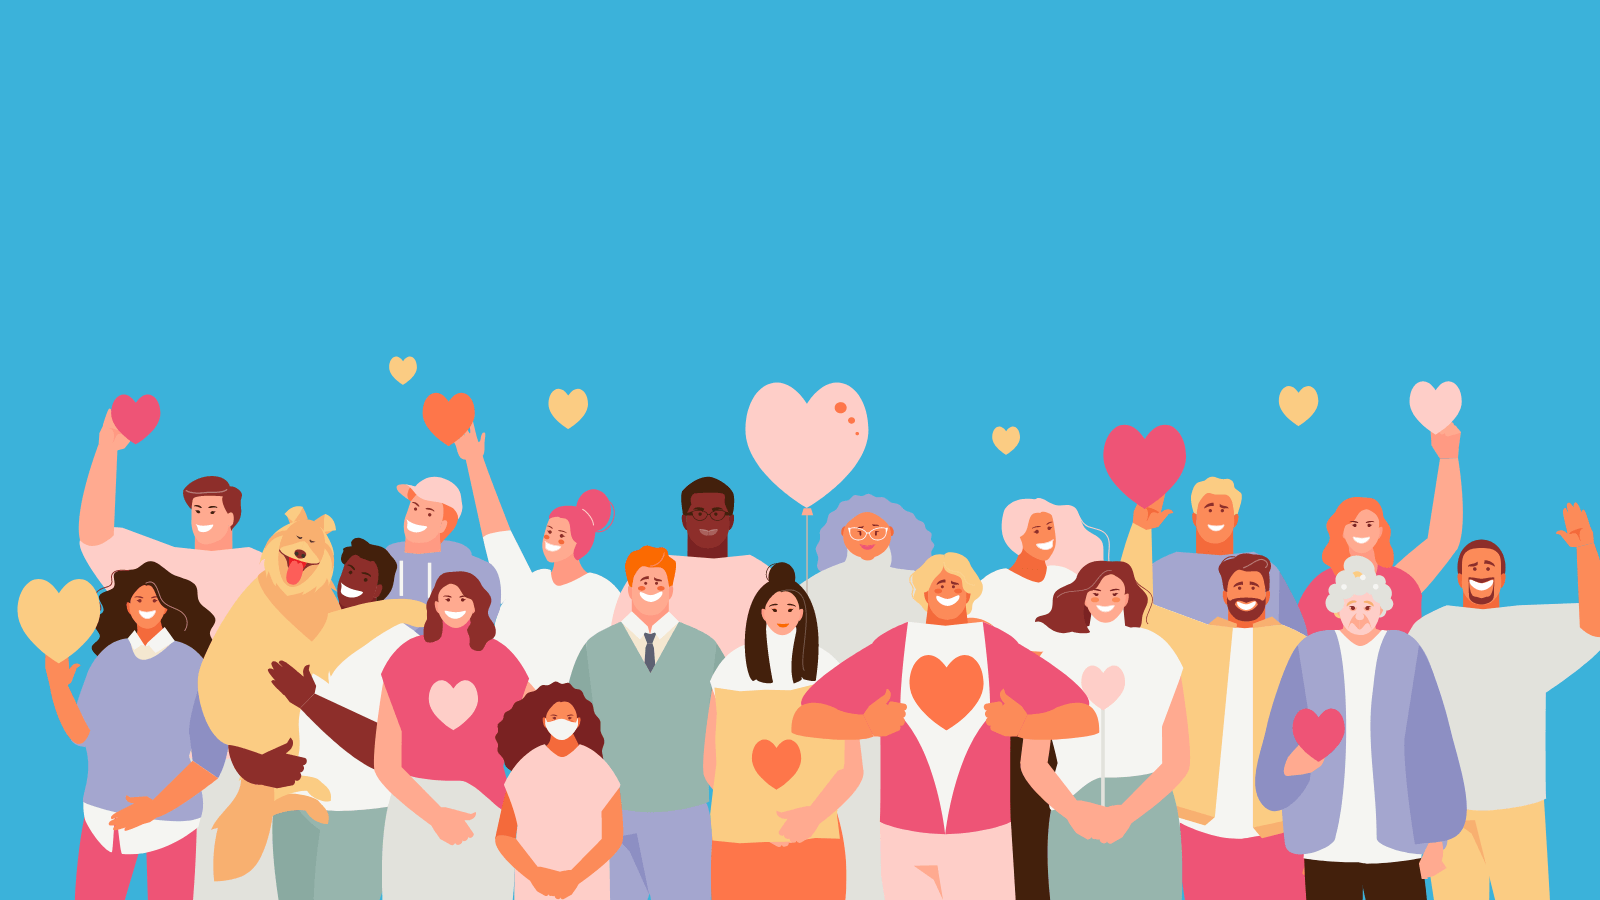 A diverse crowd of people holding hearts